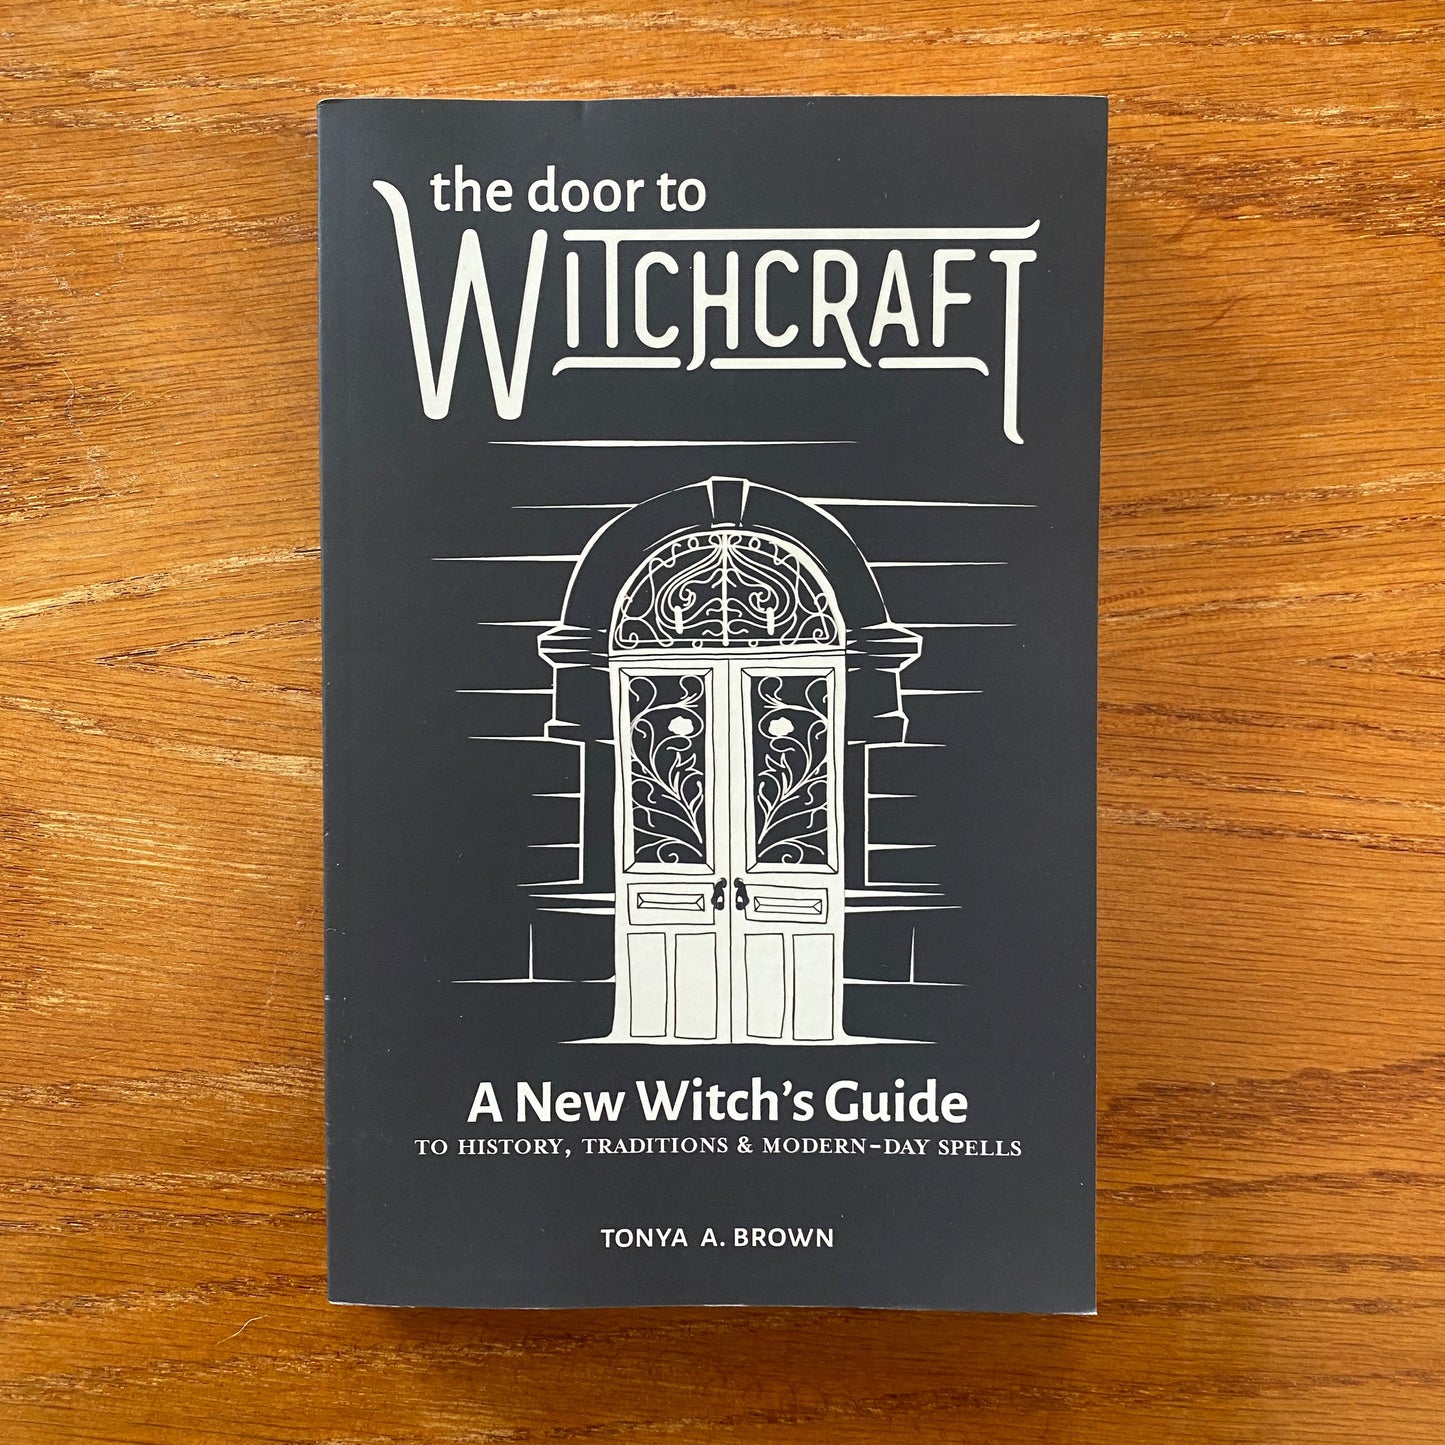 The Door To Witchcraft: A New Witch's Guide to History, Traditions, and Modern Day Spells - Tonya A. Brown